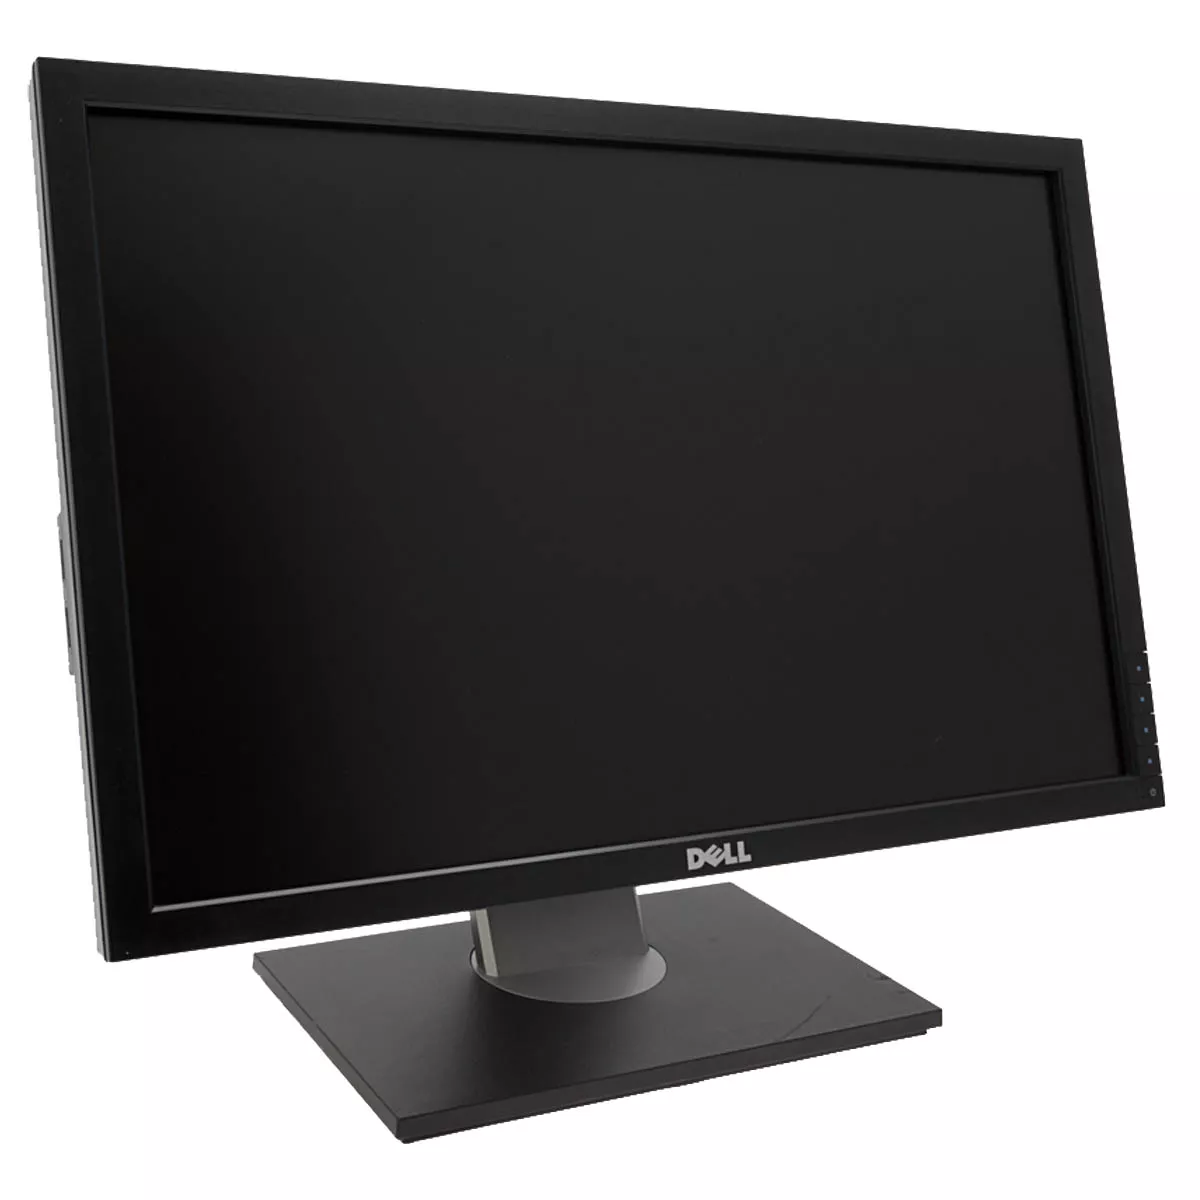 Dell P2311h schwarz 23 Zoll LED A+